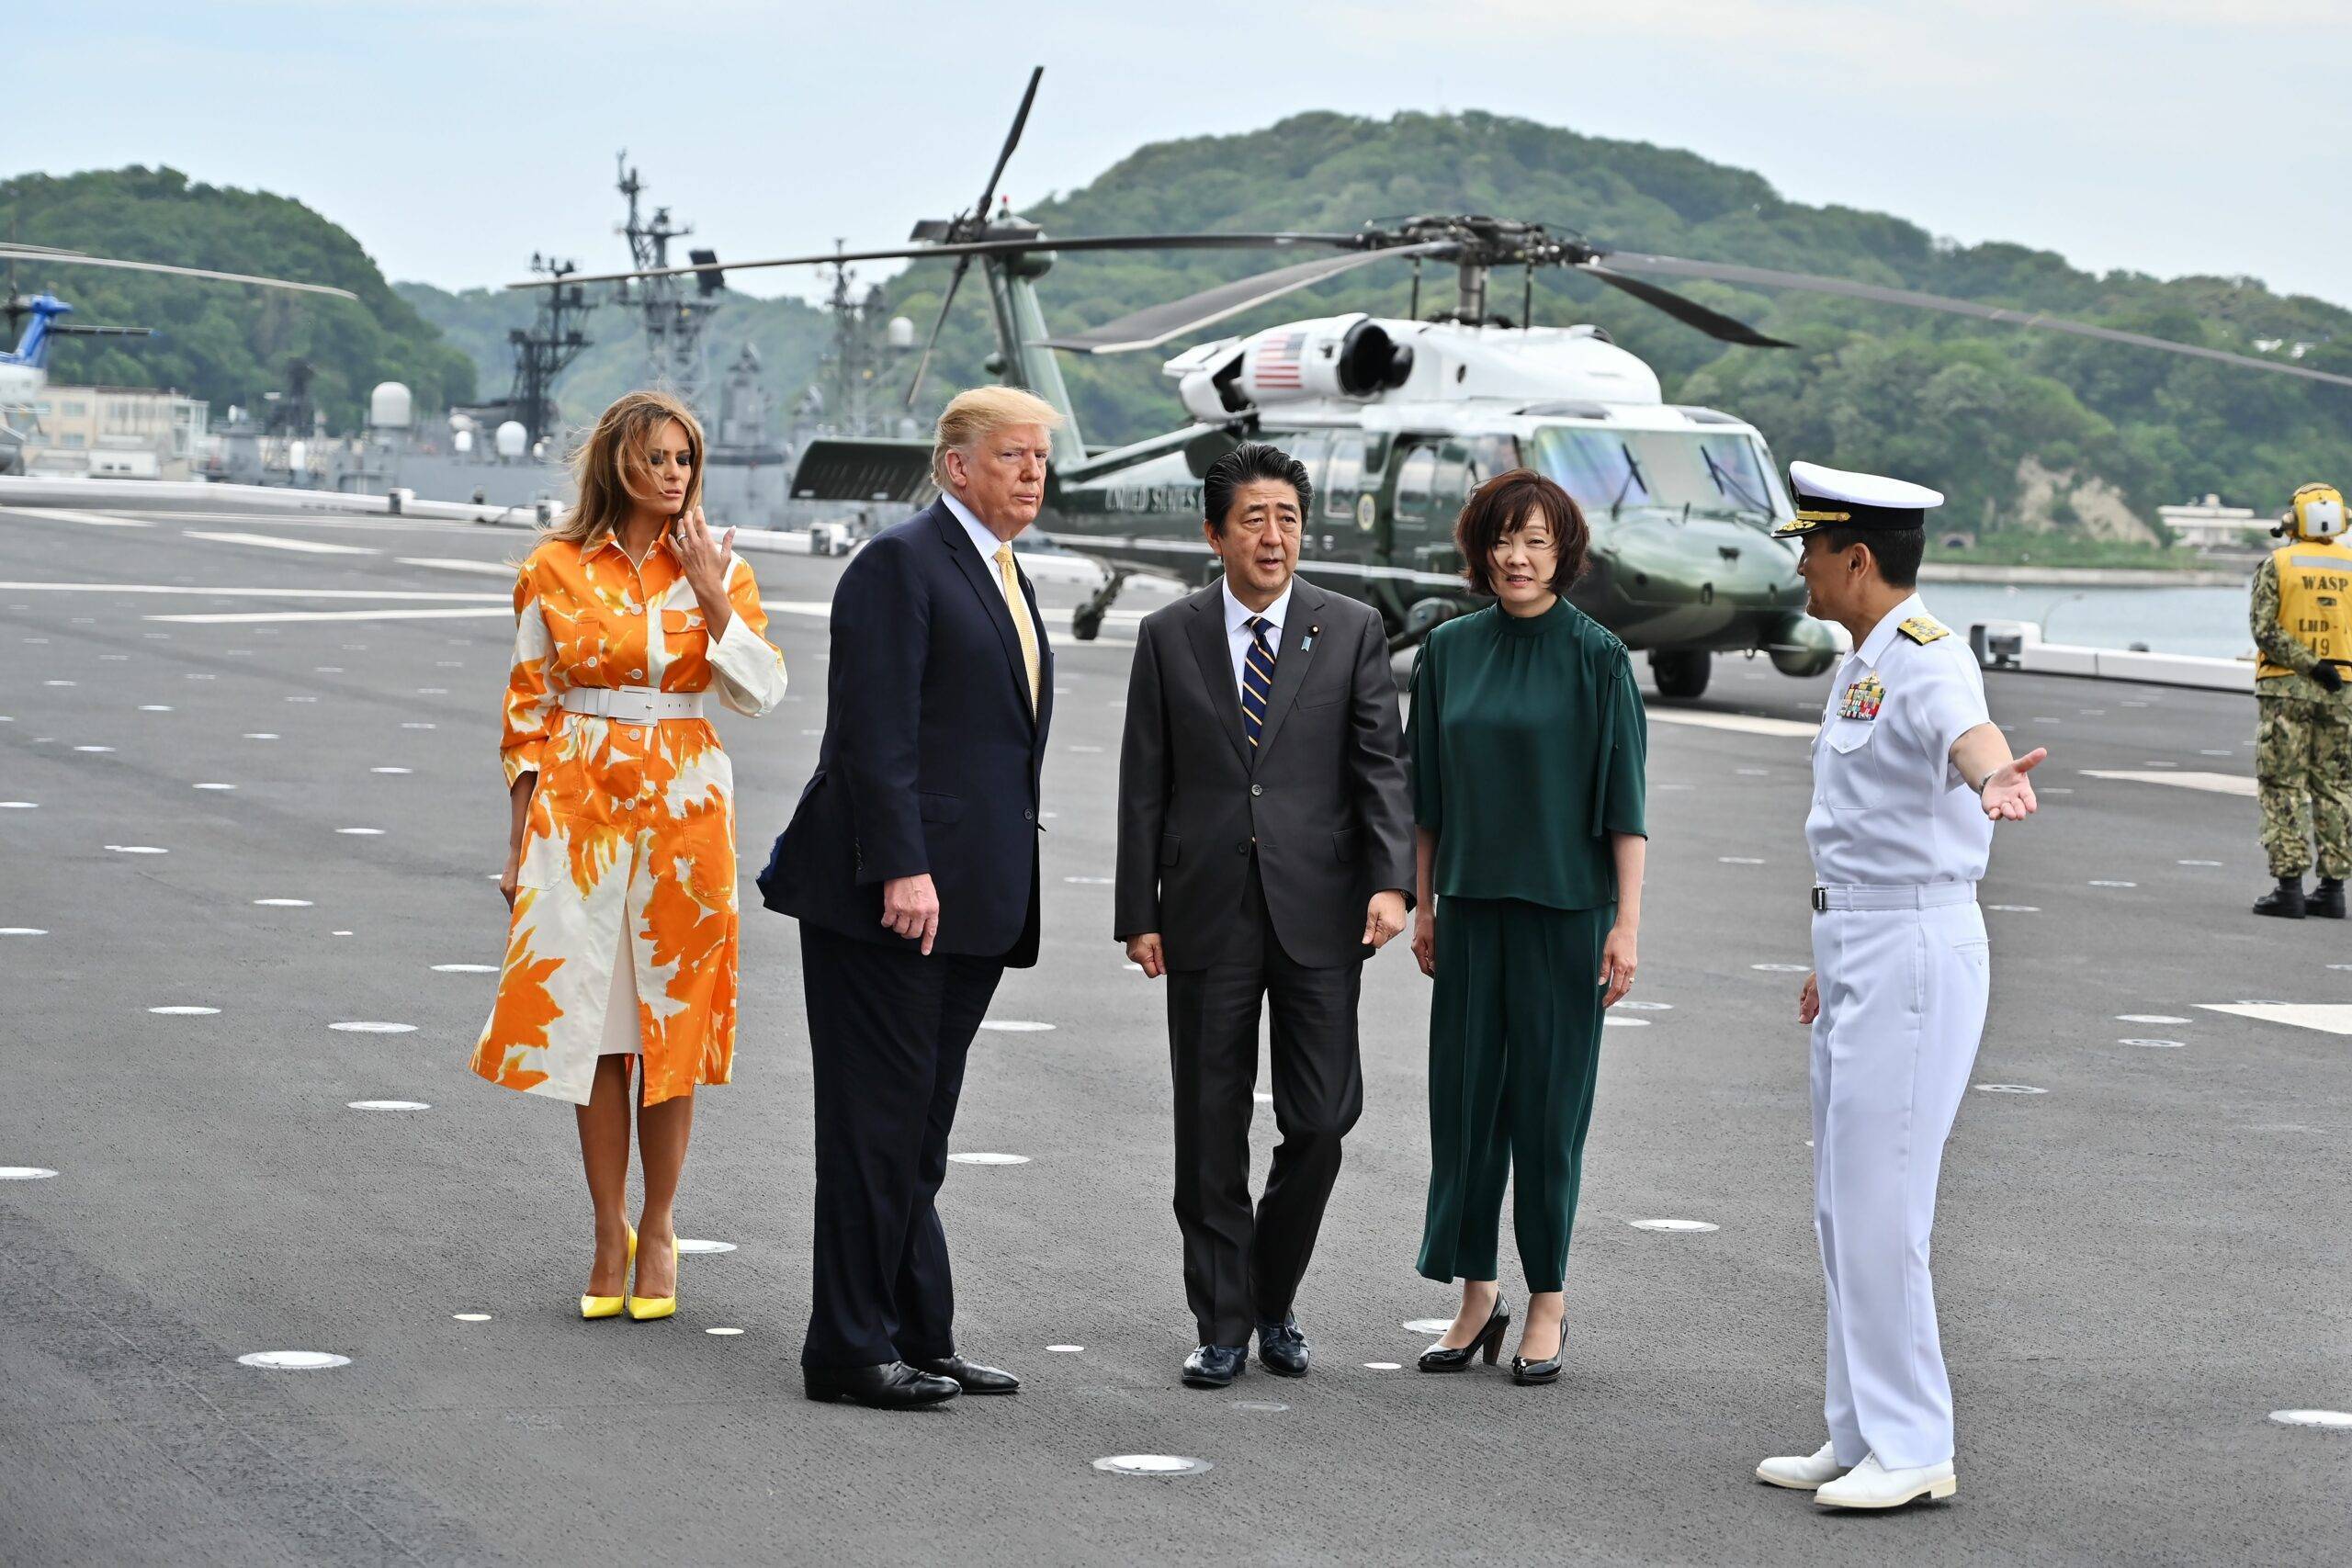 U.S President Donald Trump (2nd L) and his wife Melania Trump (L) , flanked by Shinzo Abe (C) and Akie Abe (2nd R) with the captain of the ship Mr Mizuta (R) onboard the Japan's navy ship Kaga on May 28, 2019 in Yokosuka, Kanagawa, Japan. U.S President Donald Trump is on a four-day state visit to Japan, the first official visit of the Reiwa era. Yokosuka, JAPAN 28 May 2019. //DATICHE_NDtrumpaboardpool11/1905280908/Credit:Charly Triballeau Pool/SIPA/1905280913